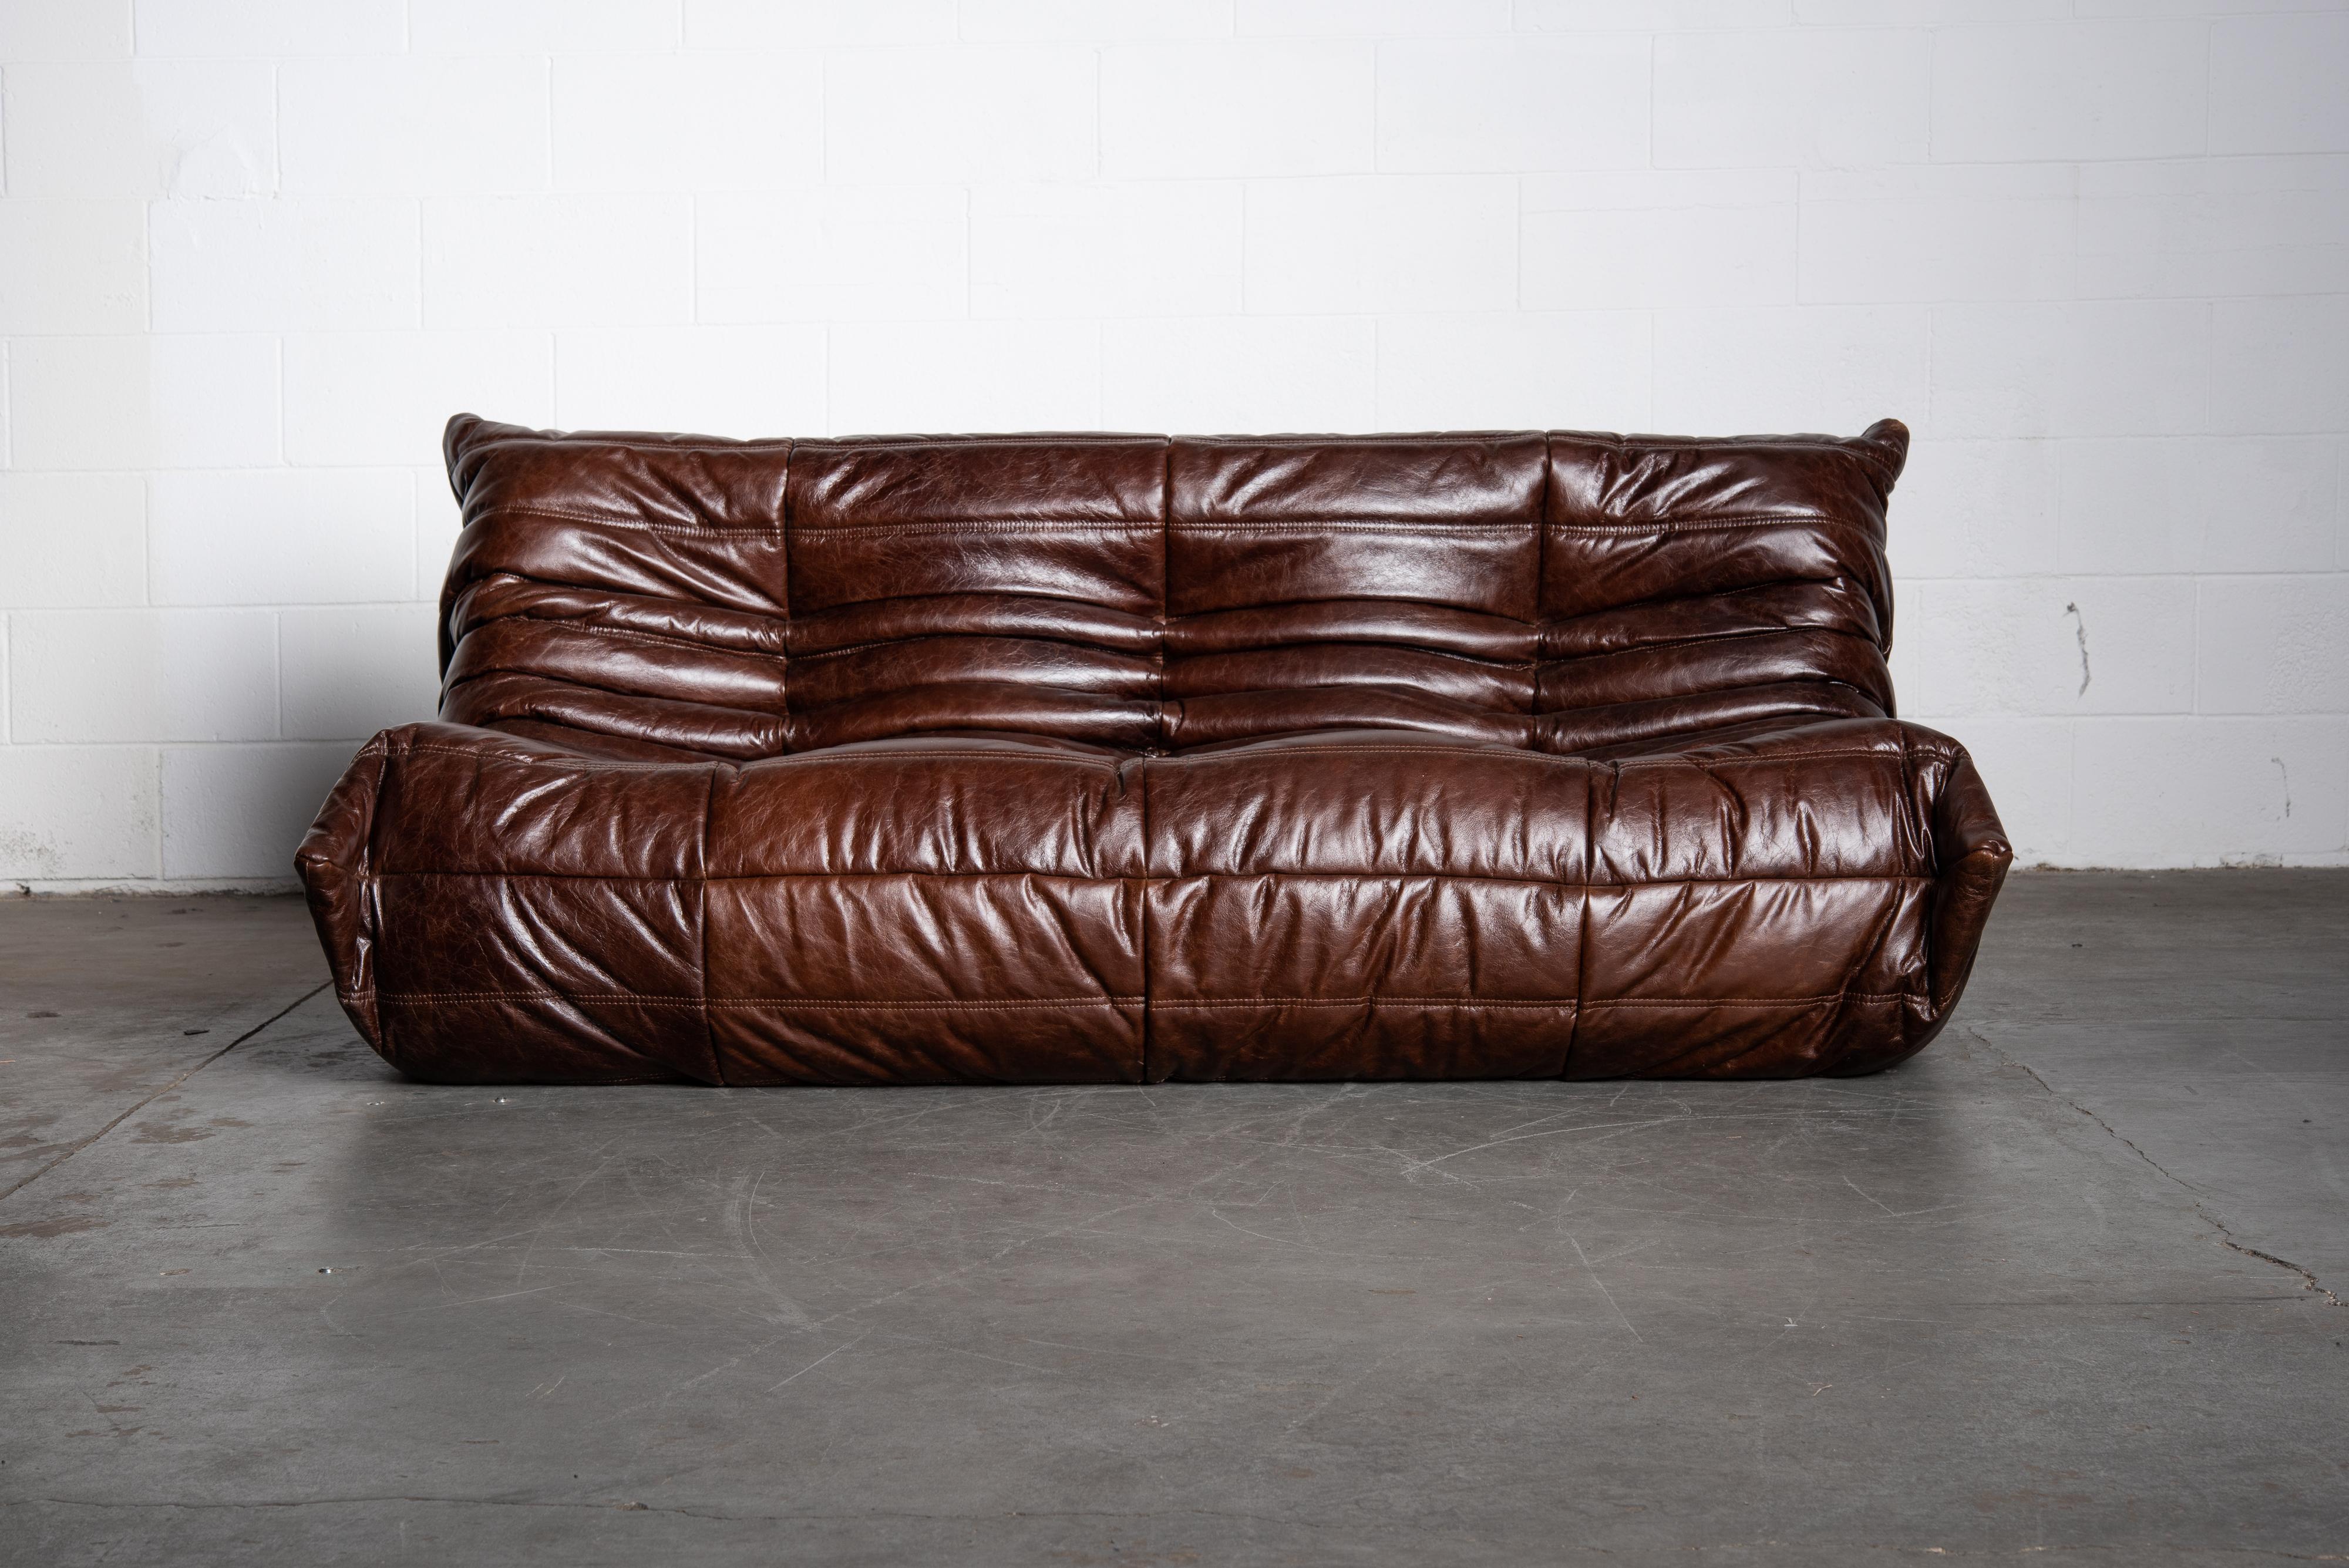 This incredible dark brown leather 'Togo' three-seat sofa was designed by Michel Ducaroy in 1973 for Ligne Roset, France. Signed with Ligne Roset underside decking fabric and label. Originally designed in the 1970s, this deep chocolate brown leather